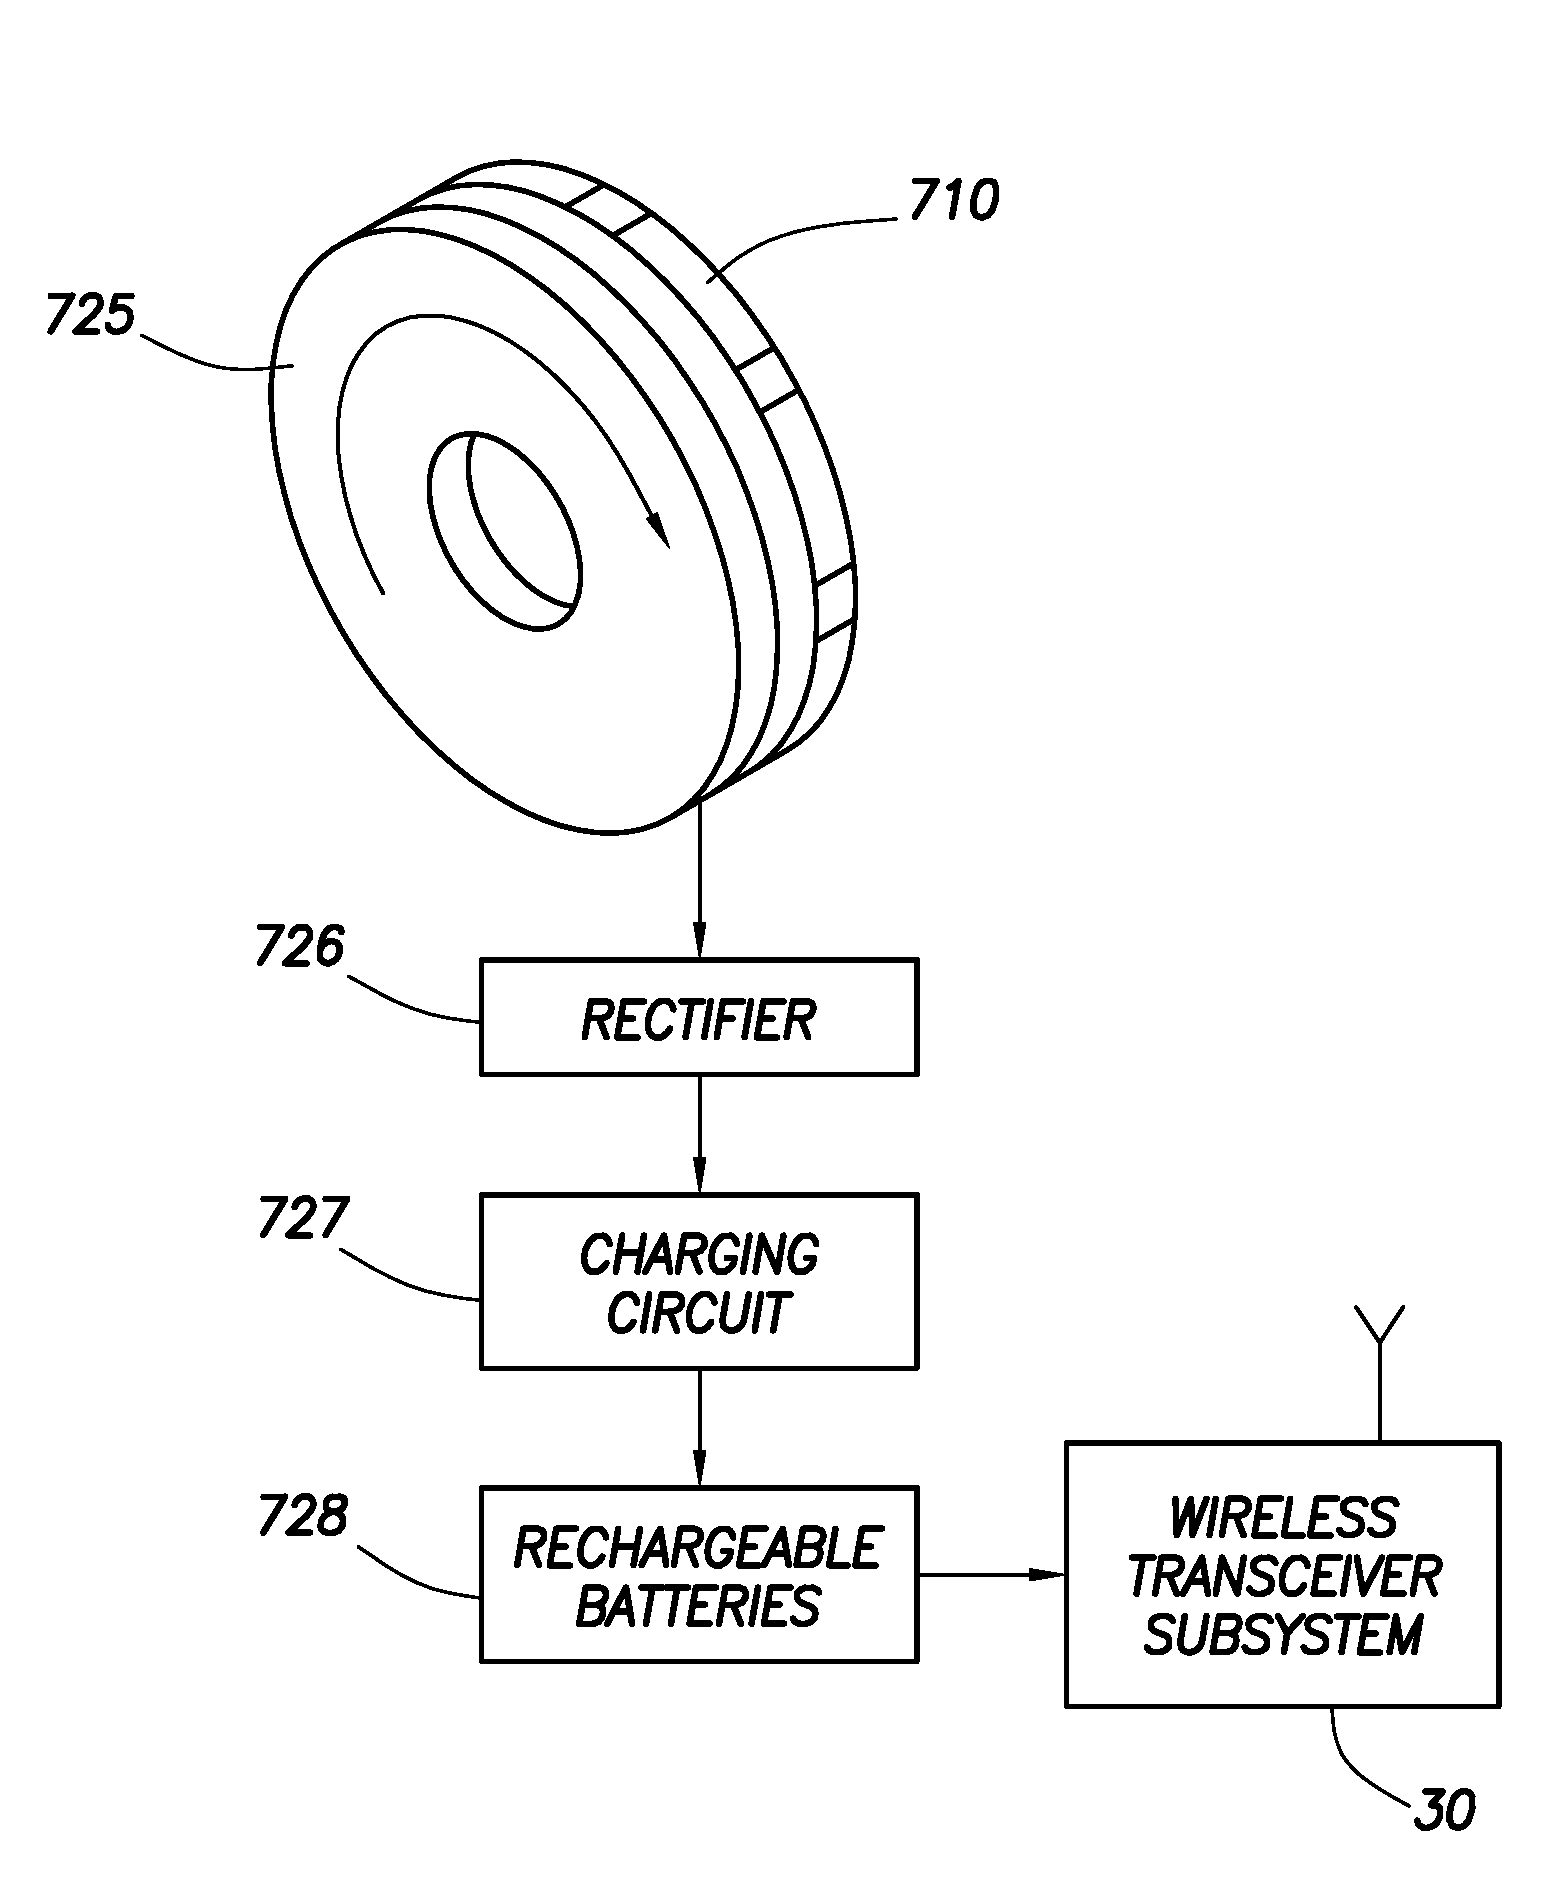 Surface communication apparatus and method for use with drill string telemetry